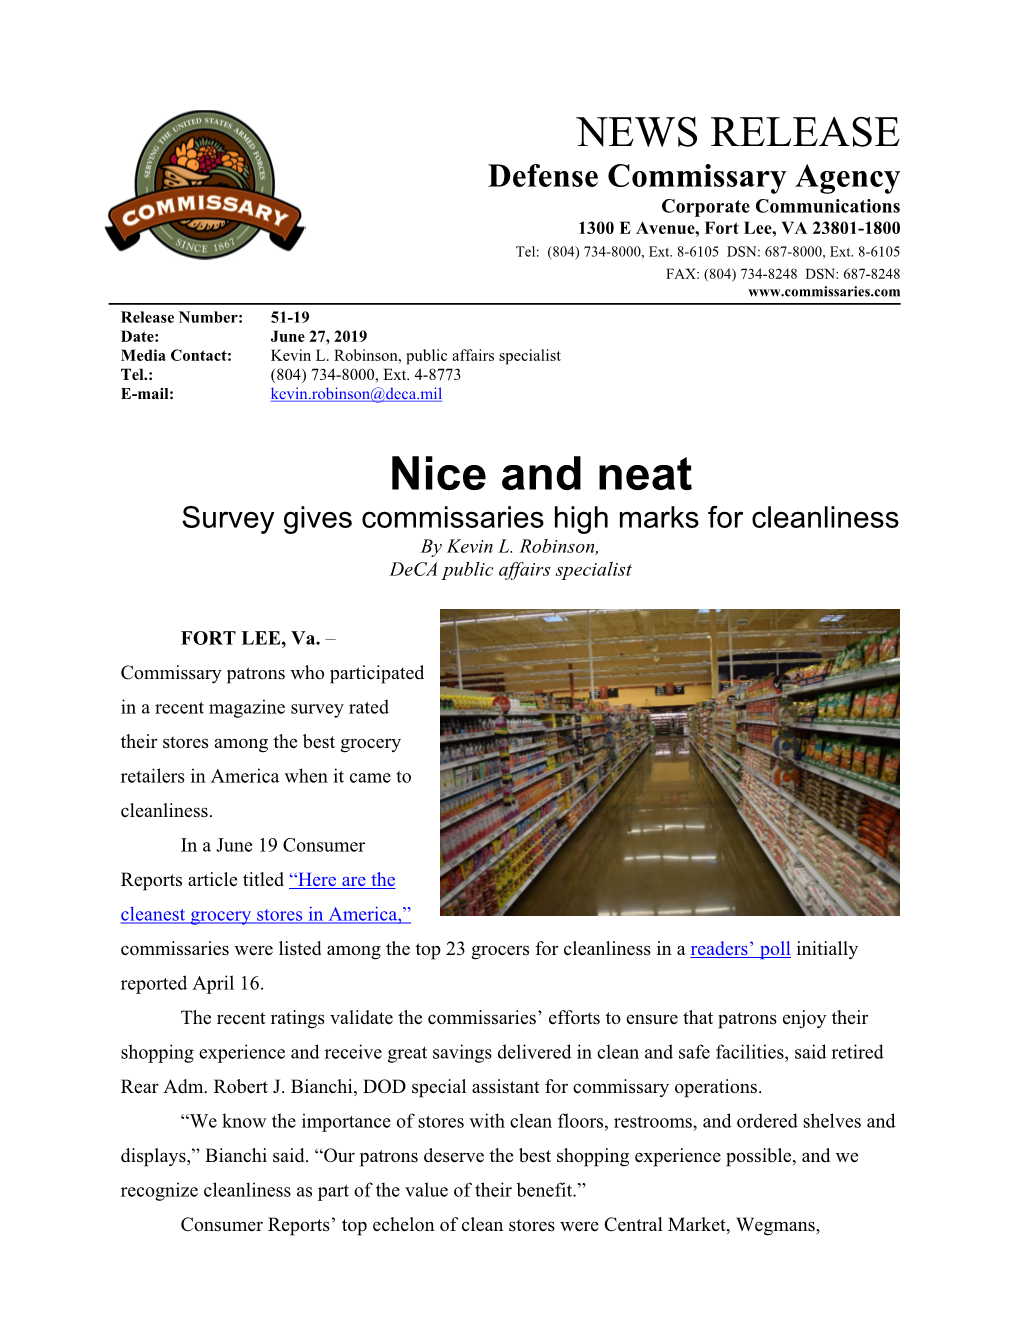 Defense Commissary Agency Corporate Communications 1300 E Avenue, Fort Lee, VA 23801-1800 Tel: (804) 734-8000, Ext